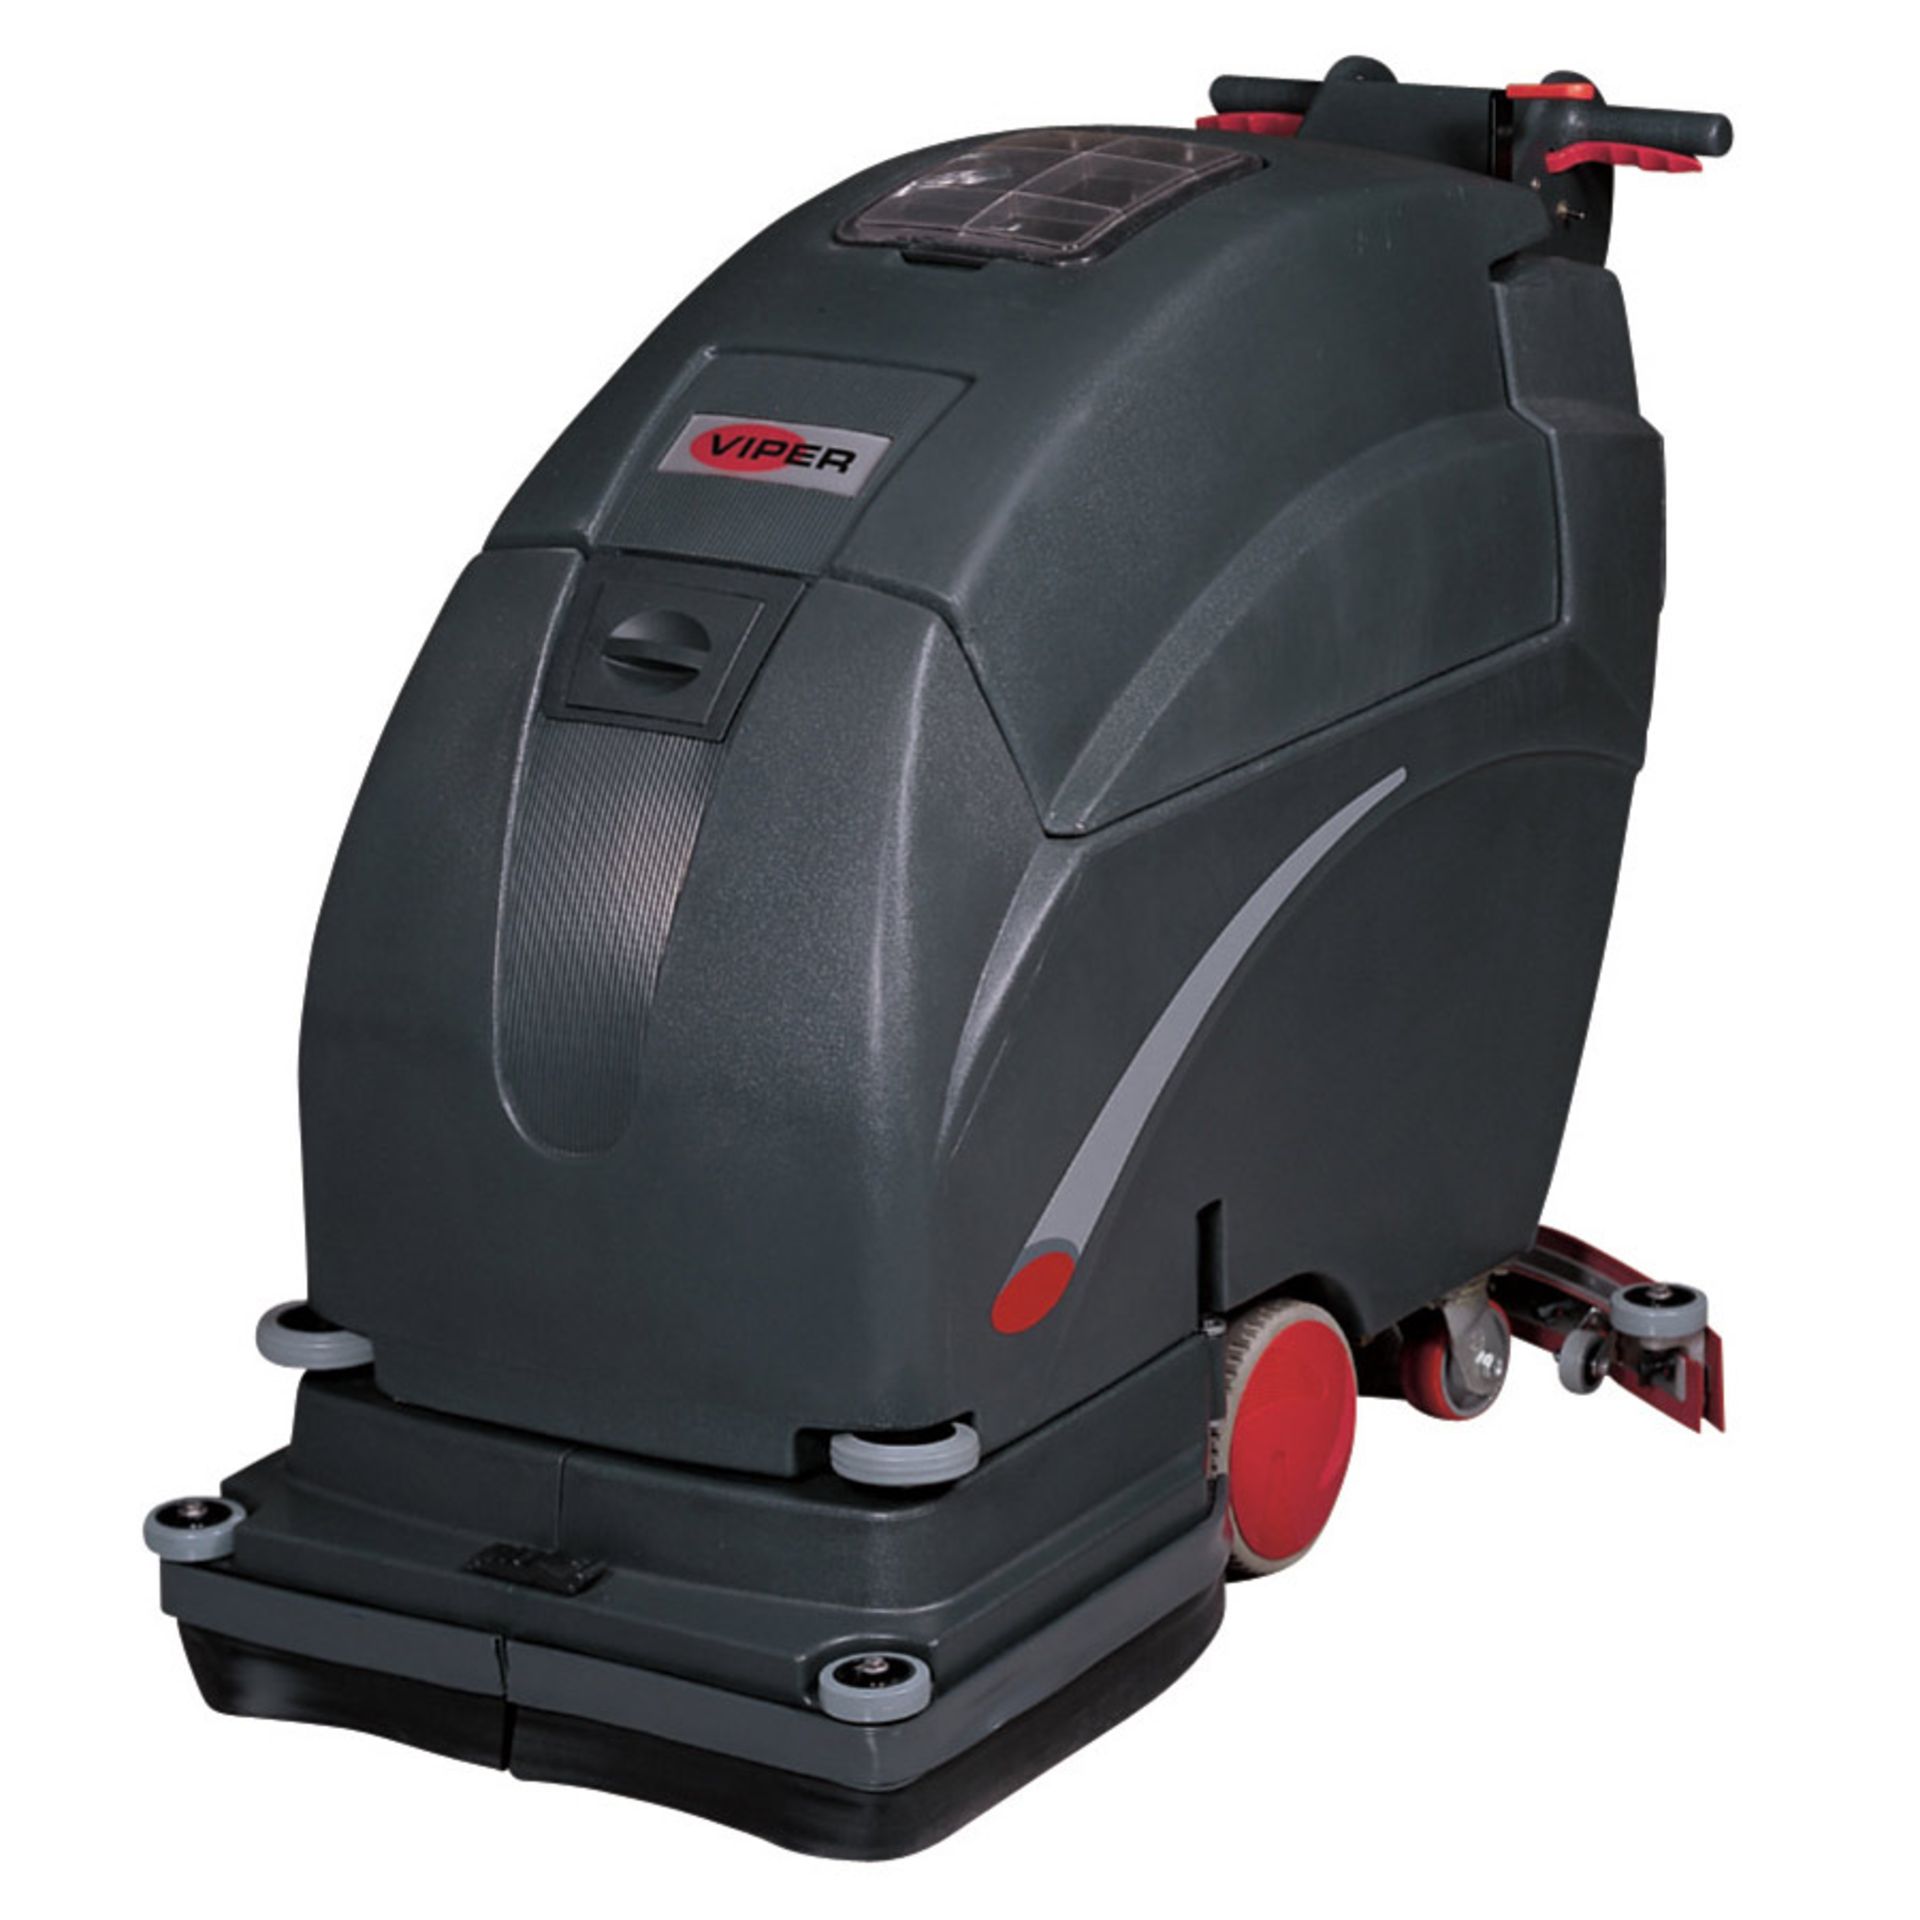 Viper Fang 20HD Walk-behind scrubber dryer. Transaxle drive system.  Light and easy to manoeuvre. - Bild 3 aus 5